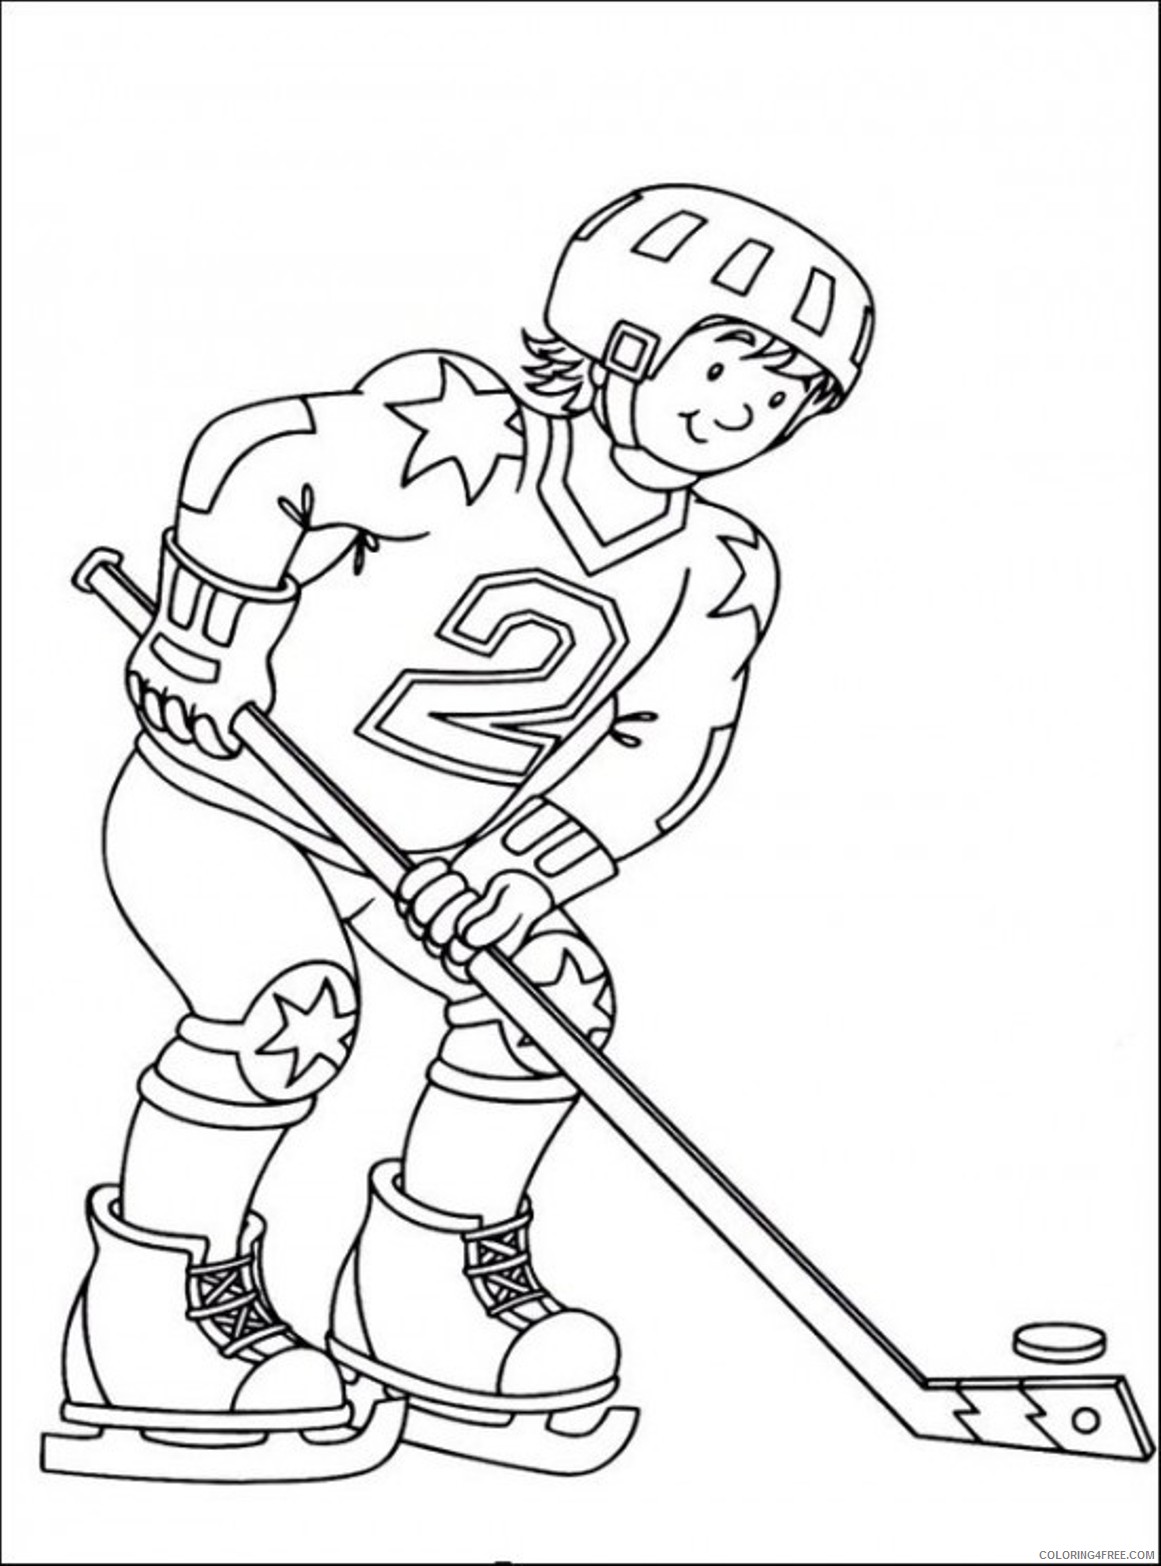 free hockey coloring pages for kids Coloring4free